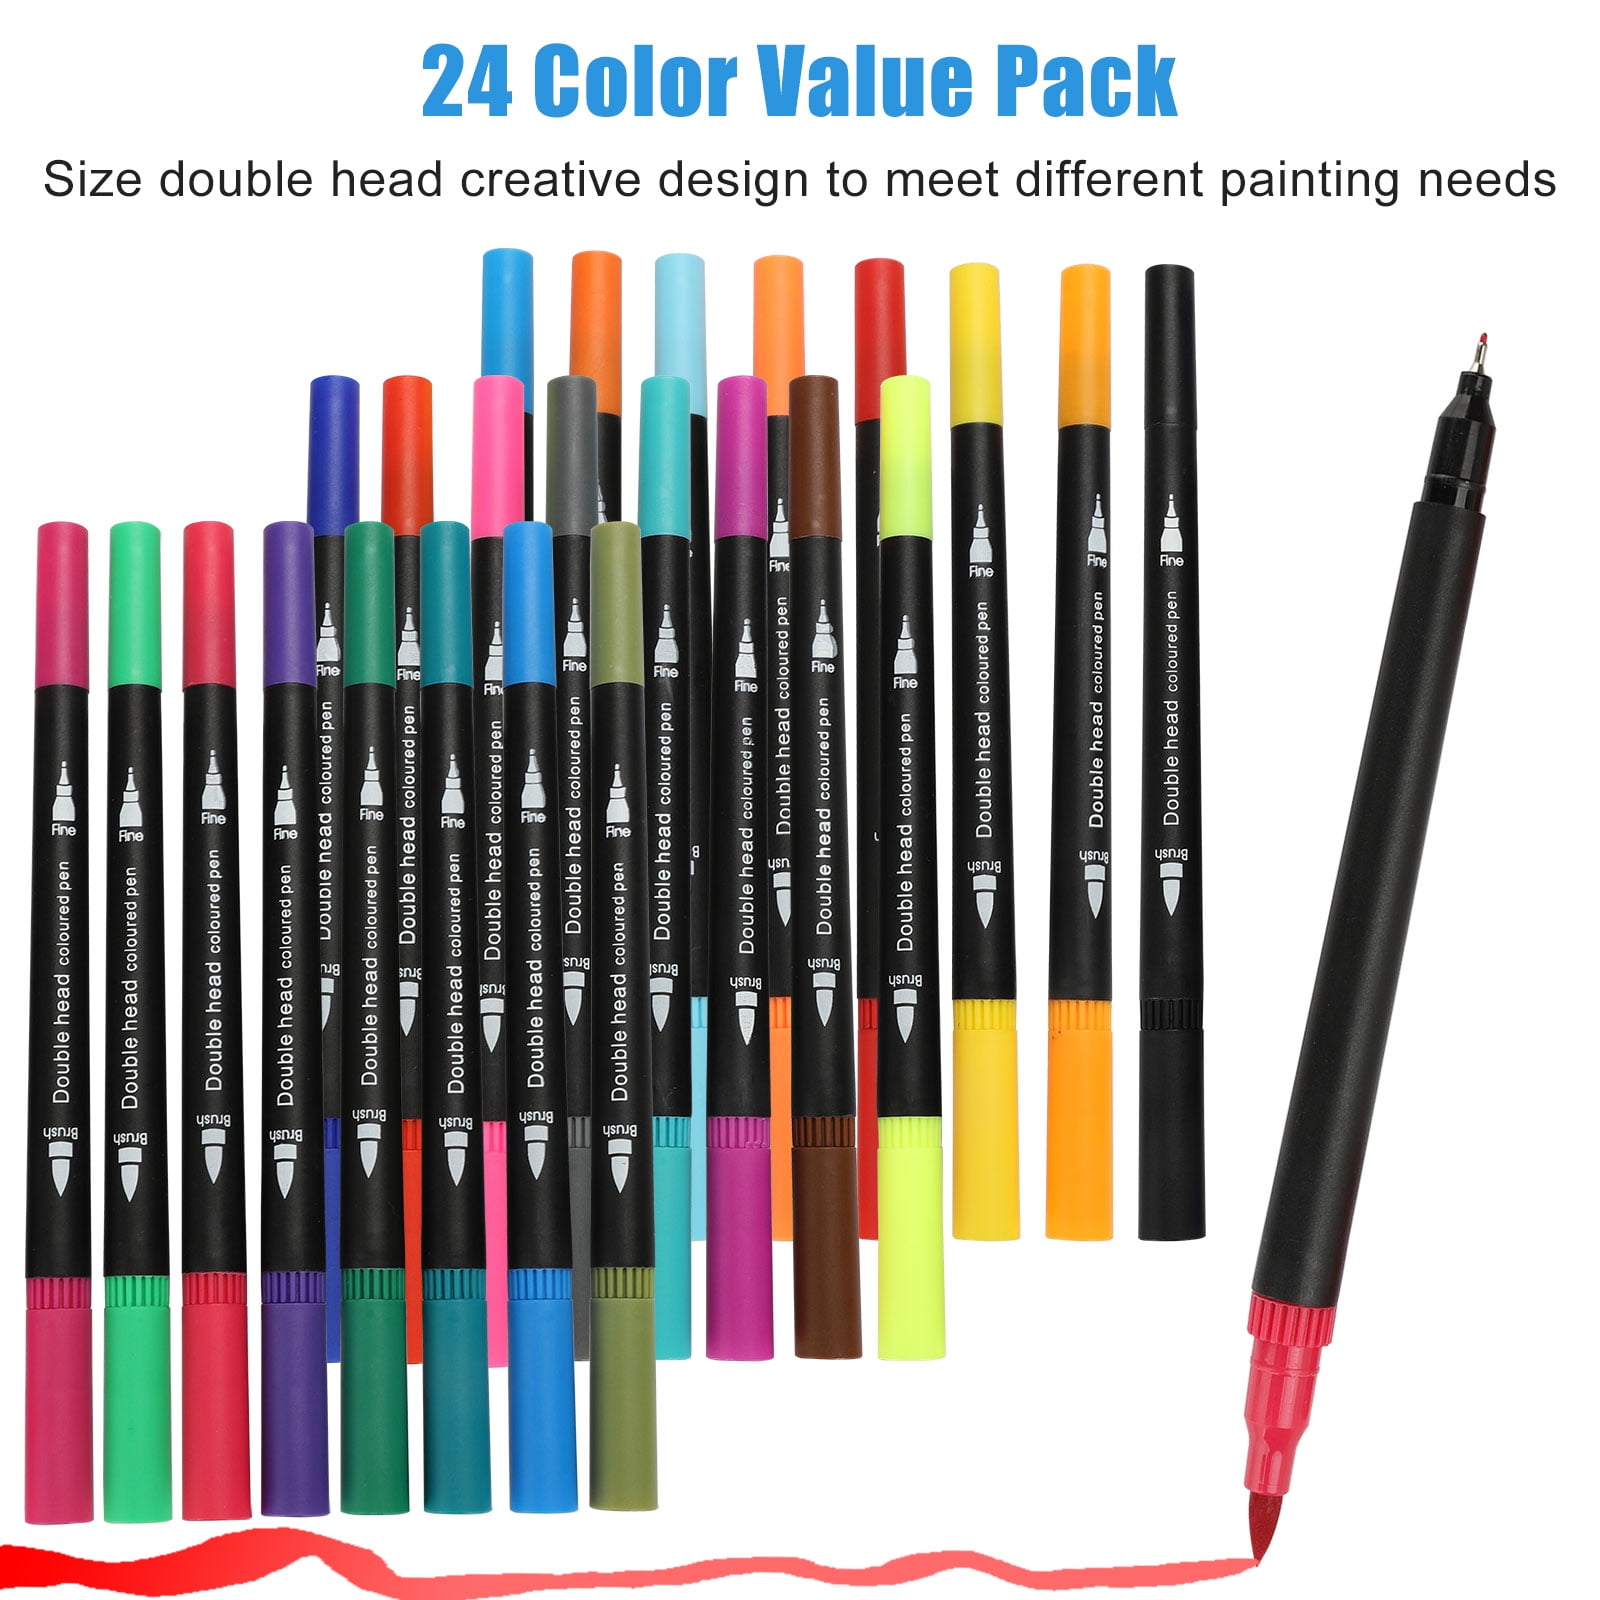 24ct Dual Tip Brush Markers by Artsmith